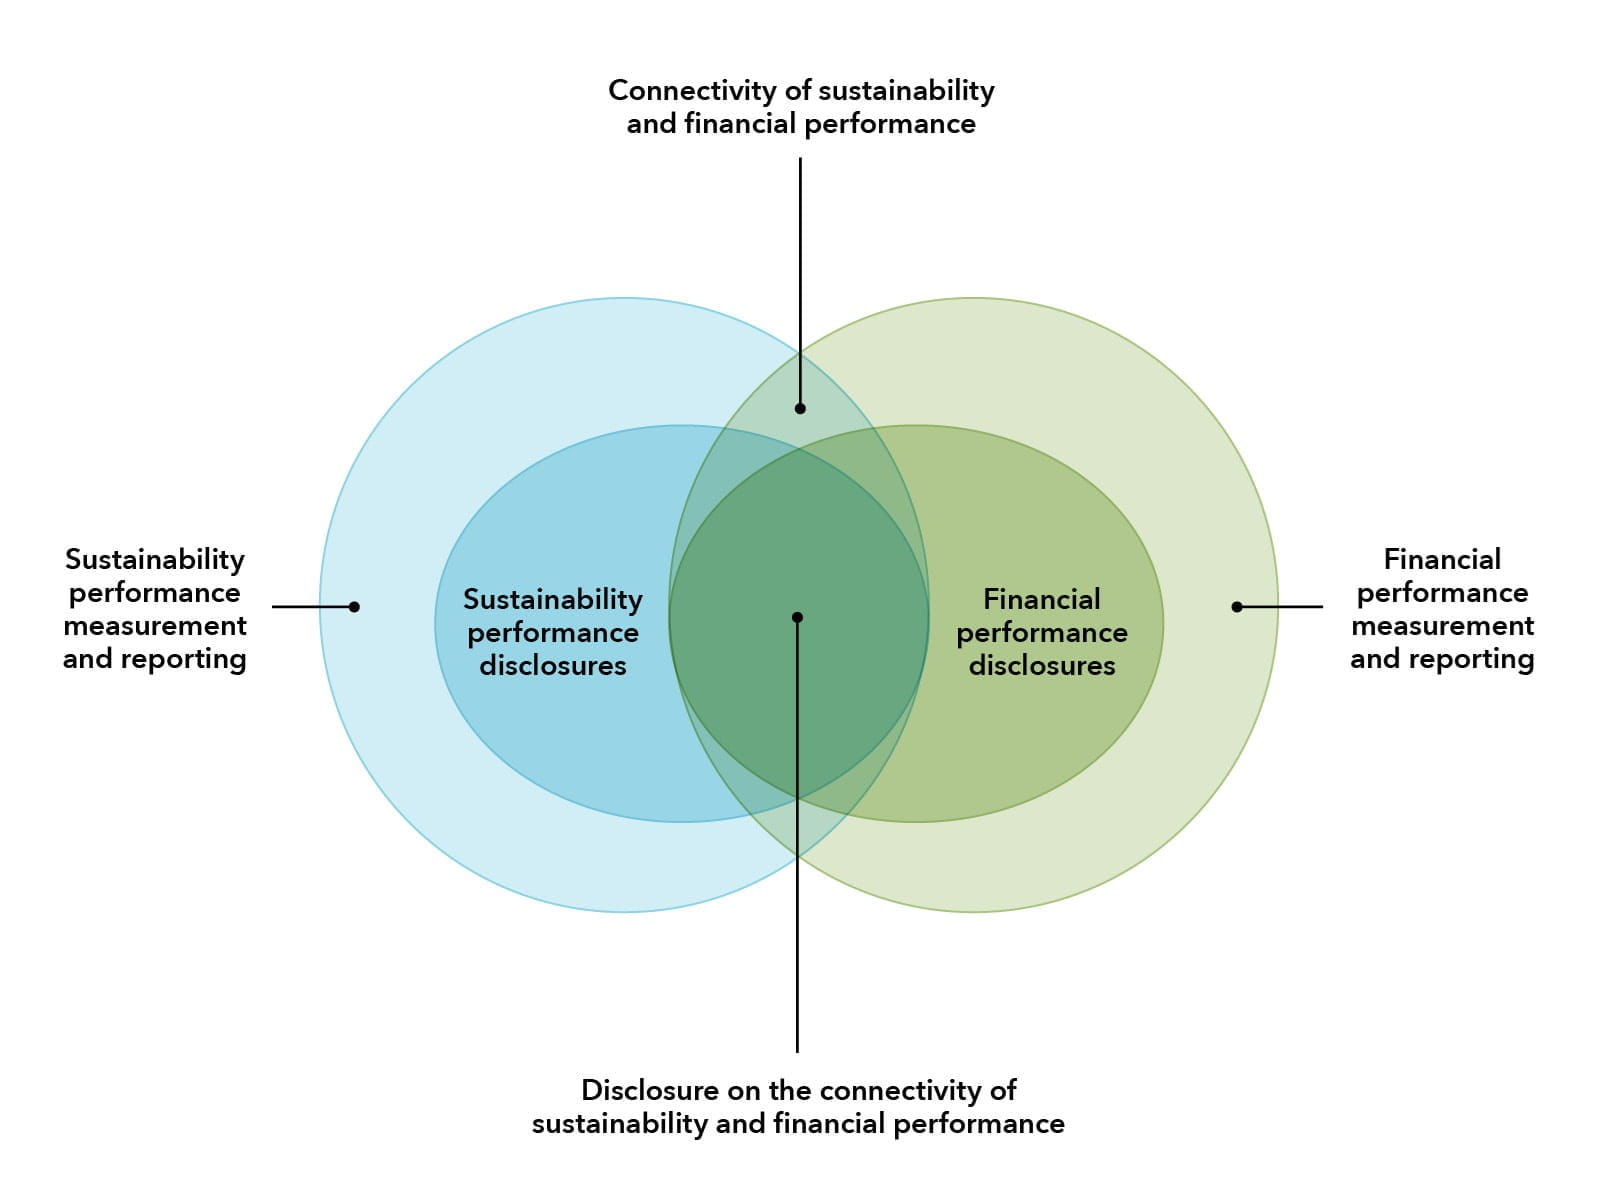 A venn diagramme showing the distinction between reporting and disclosing performance information.